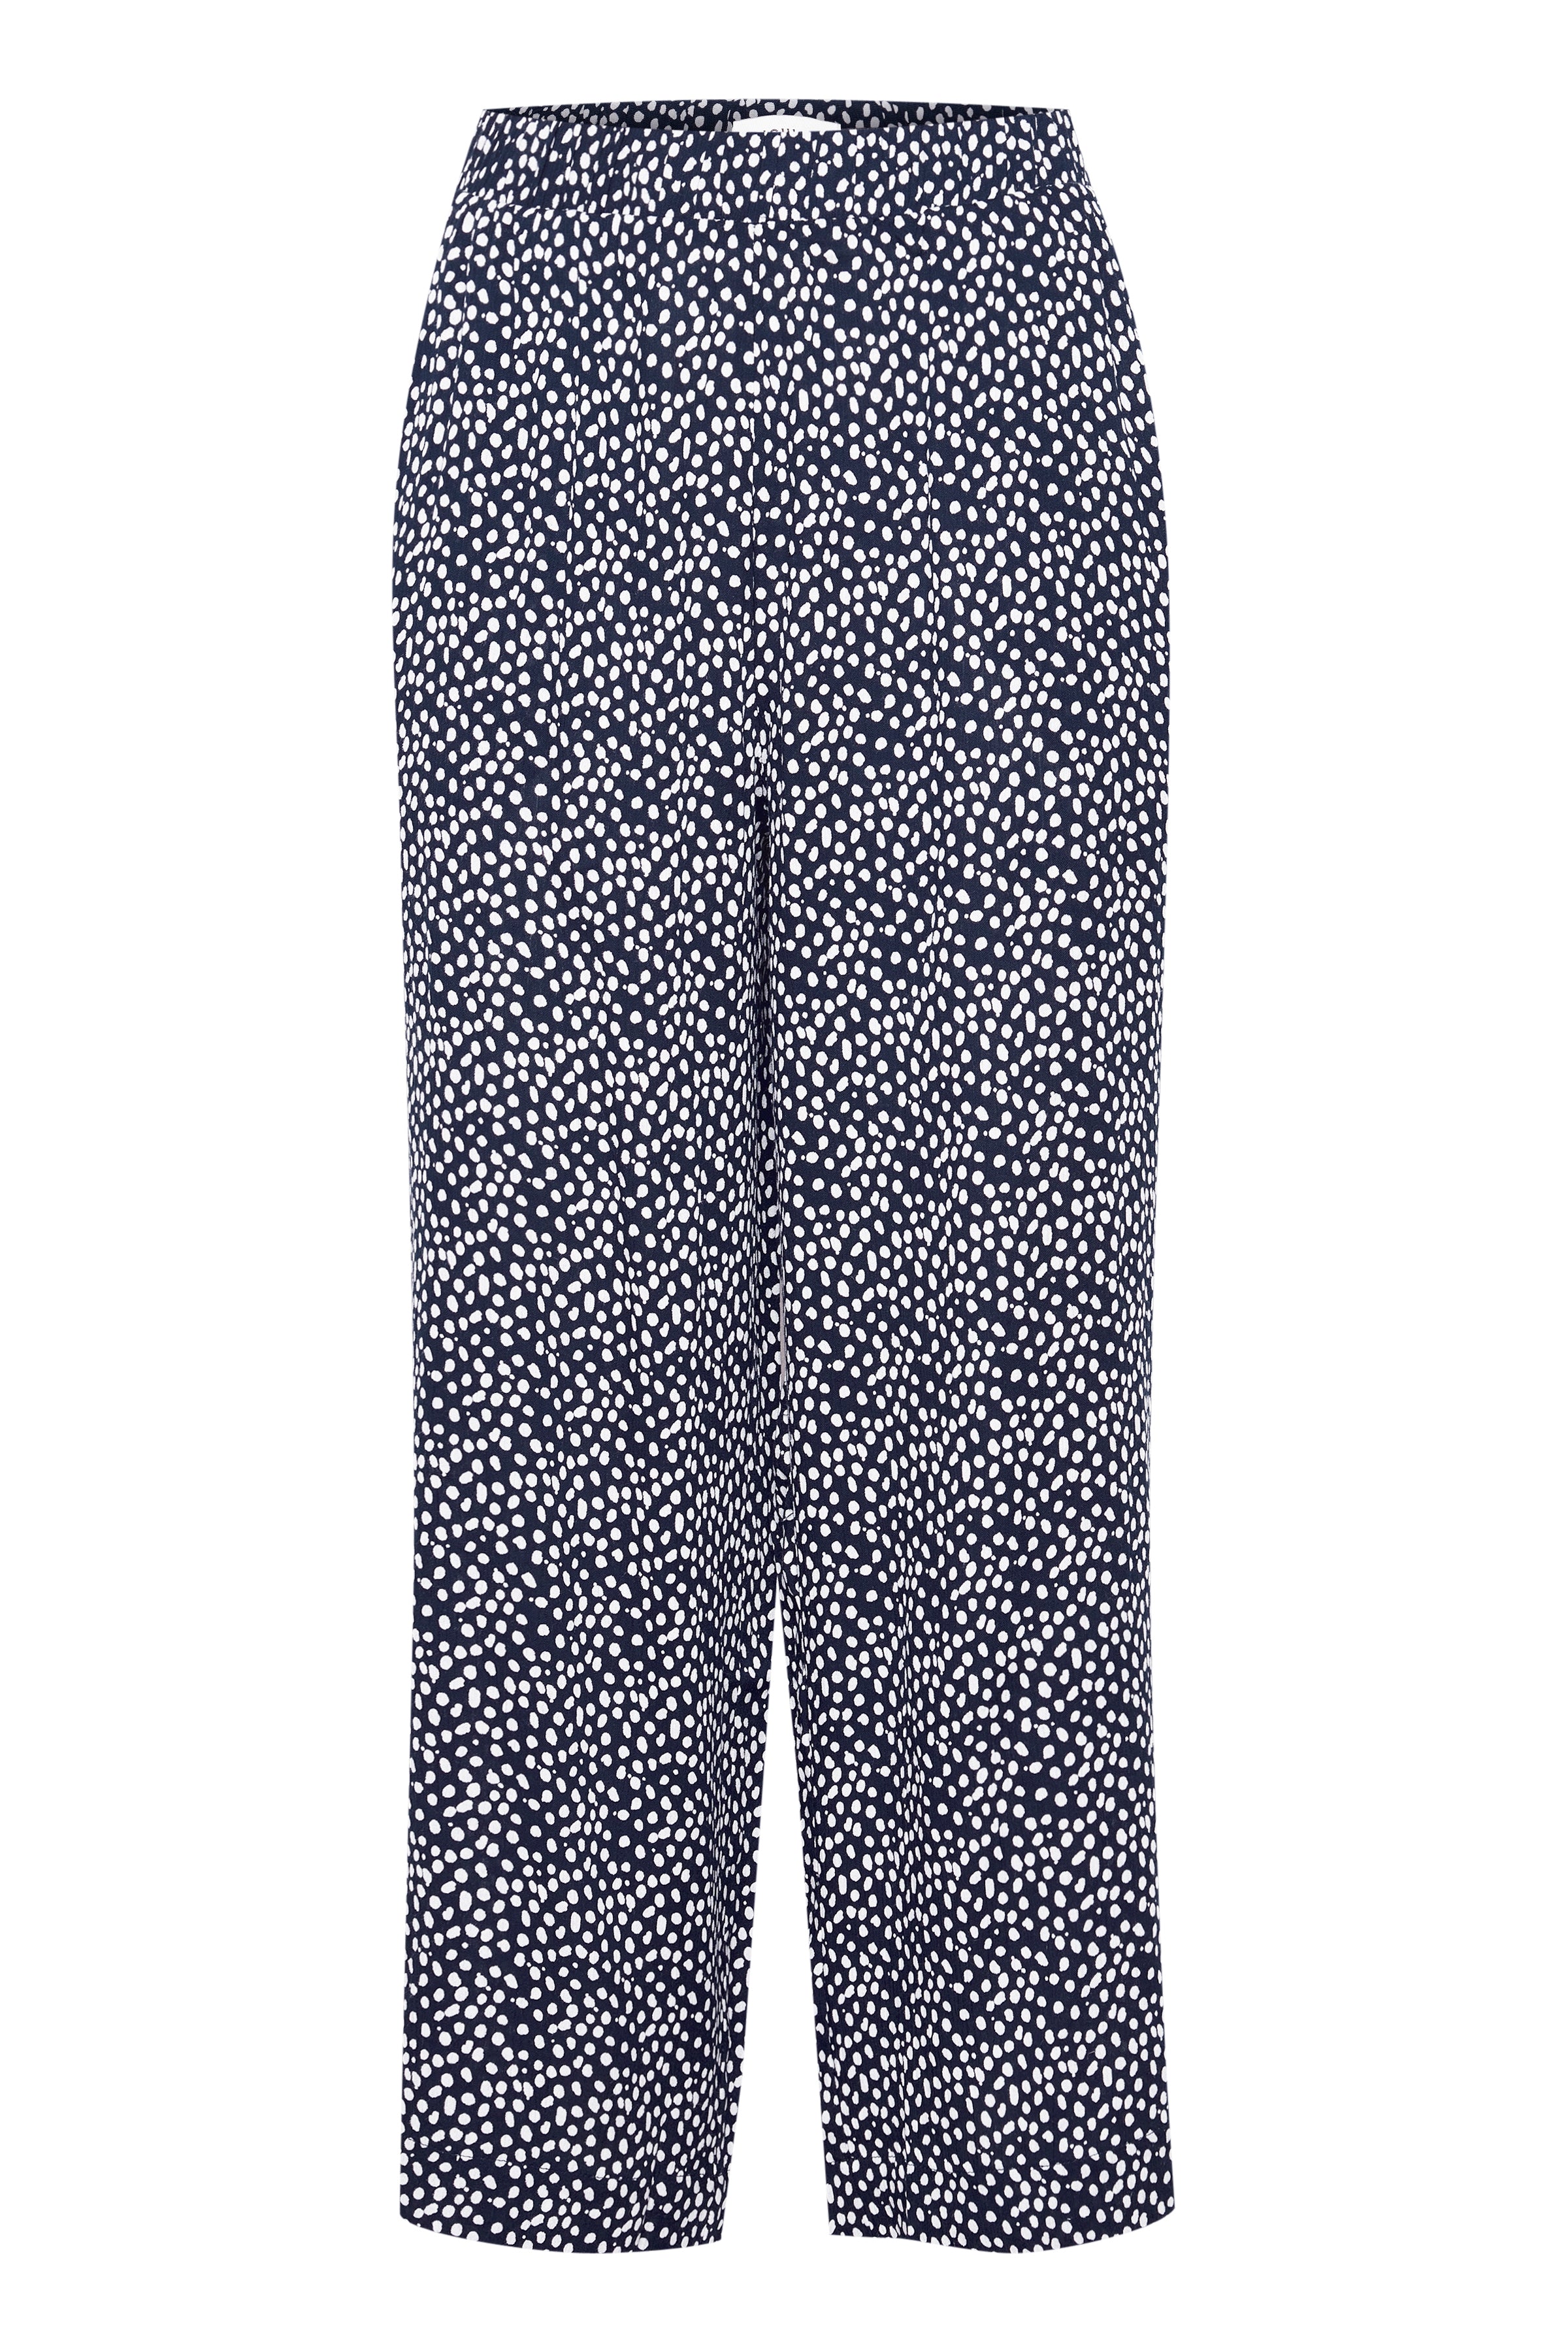 IHMarrakech Trousers - Total Eclipse Dot